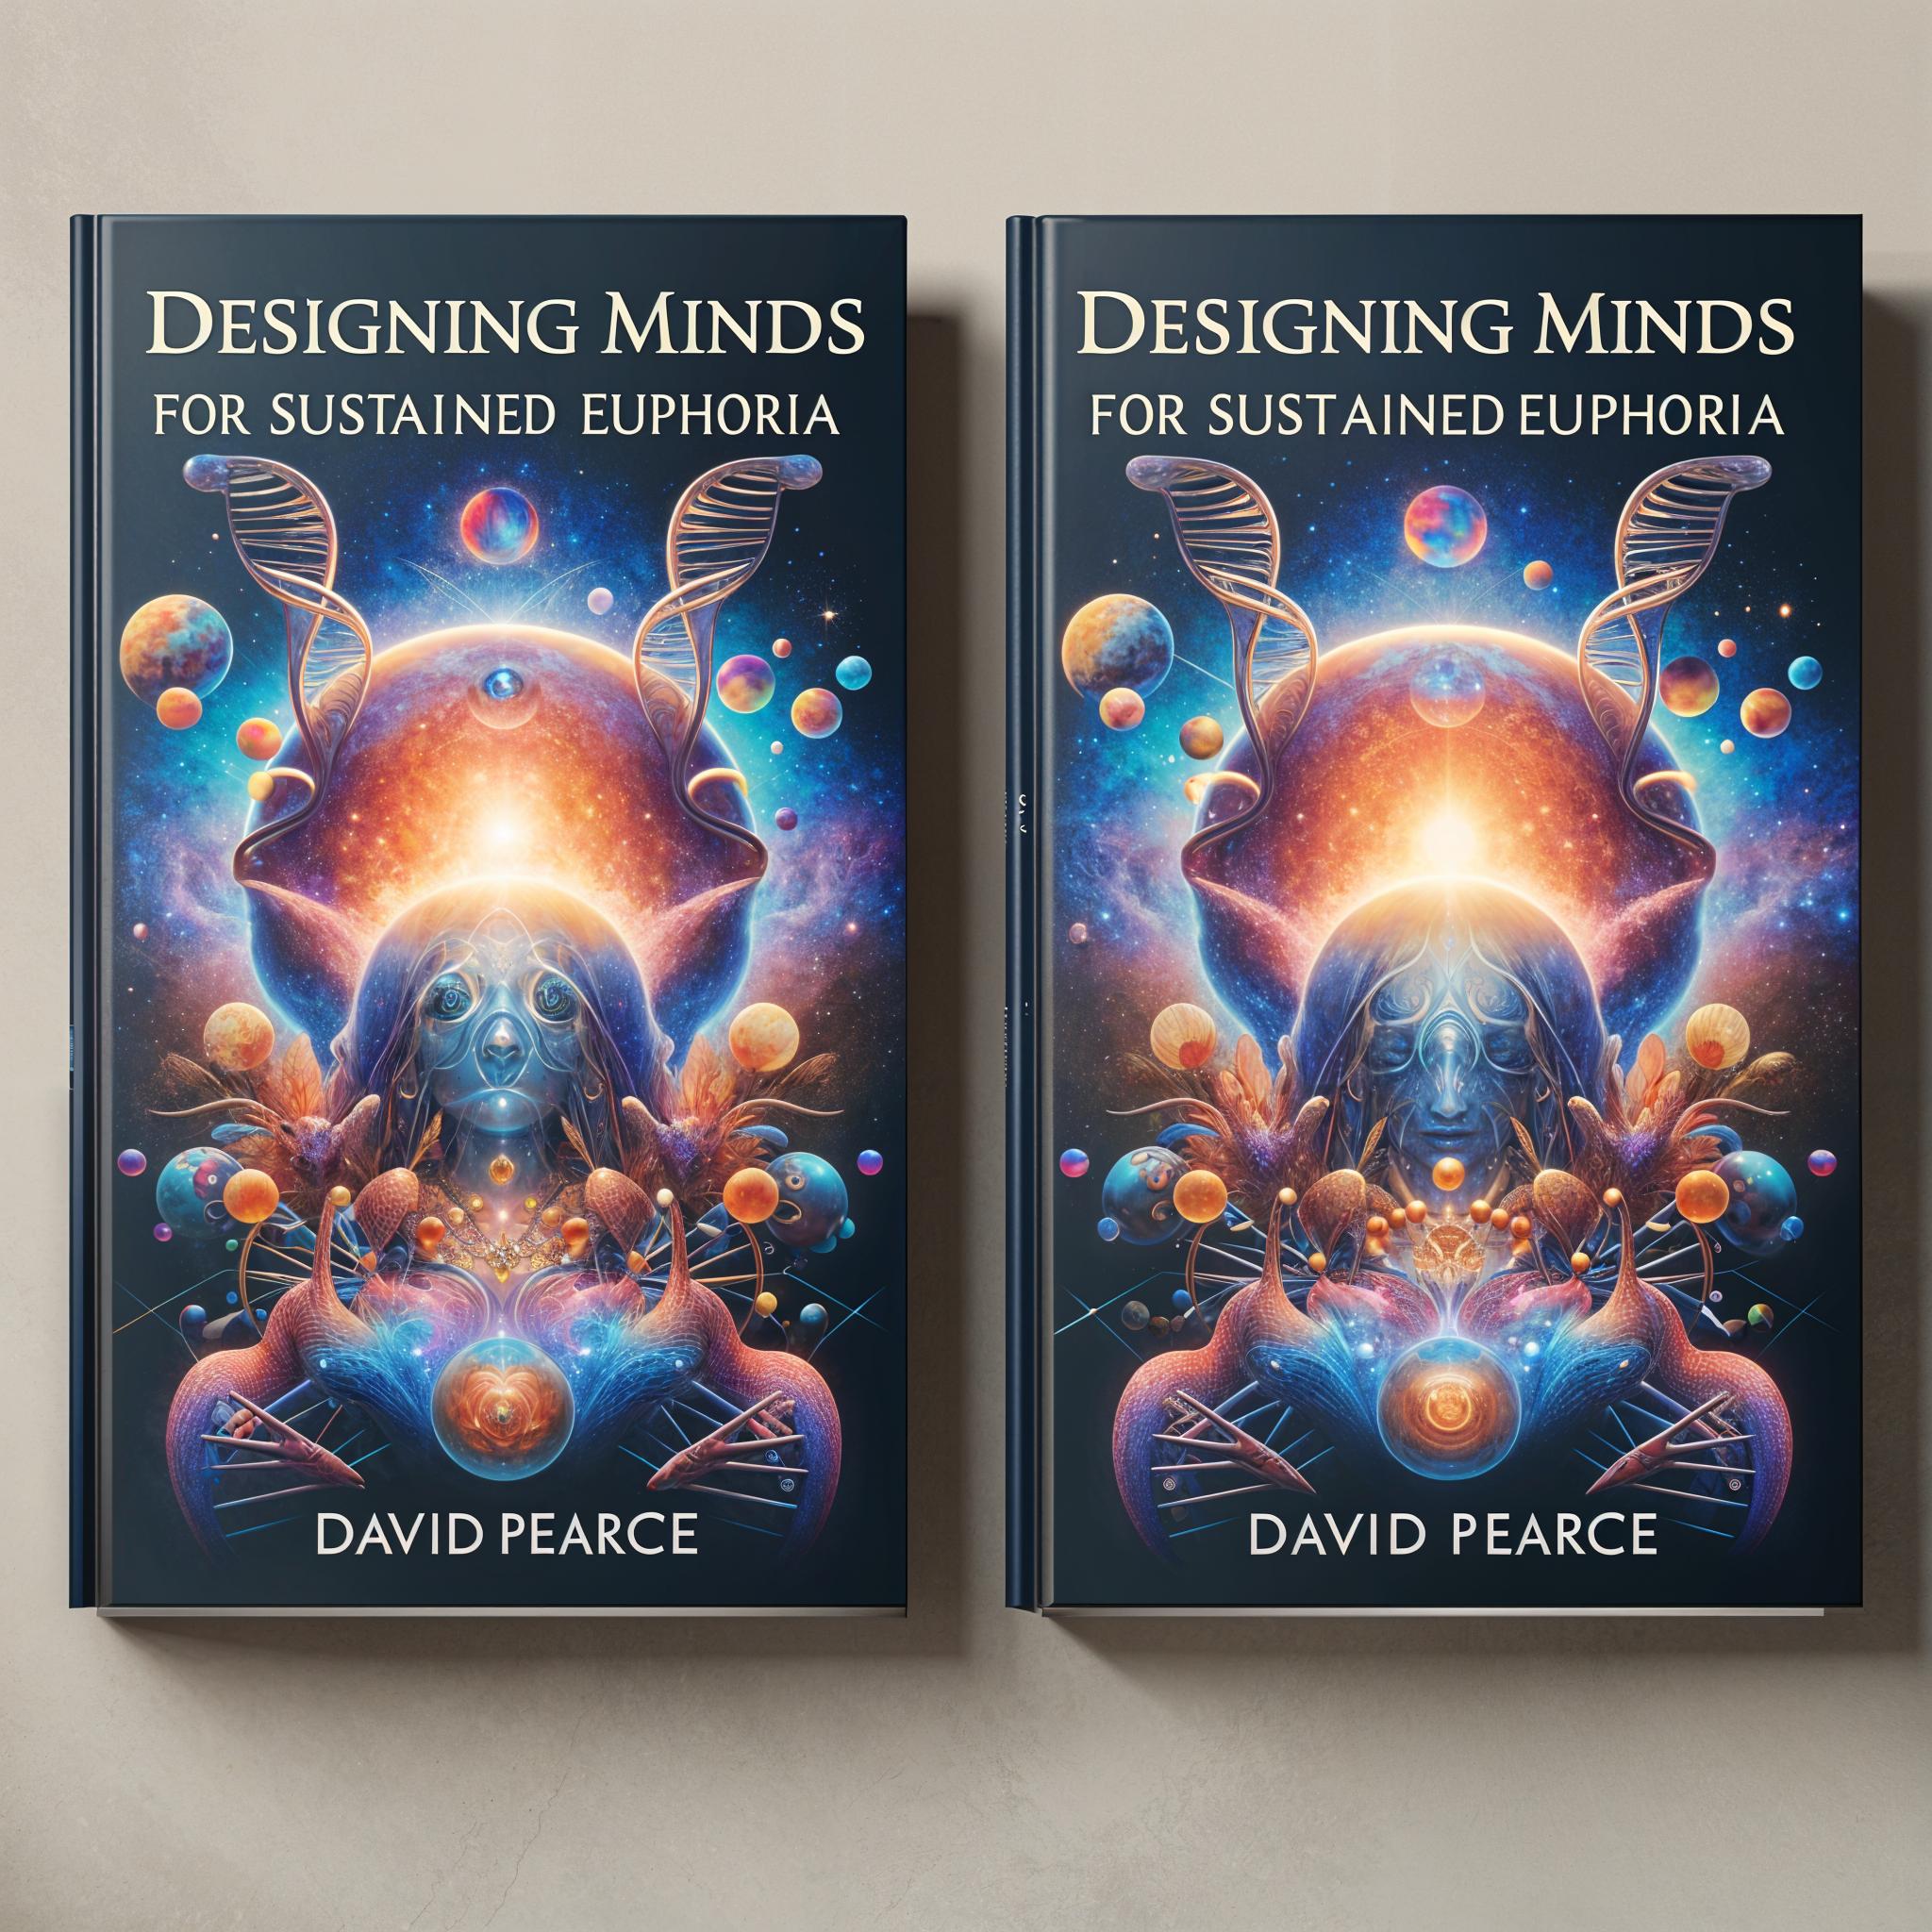 Designing Minds for Sustained Euphoria by David Pearce